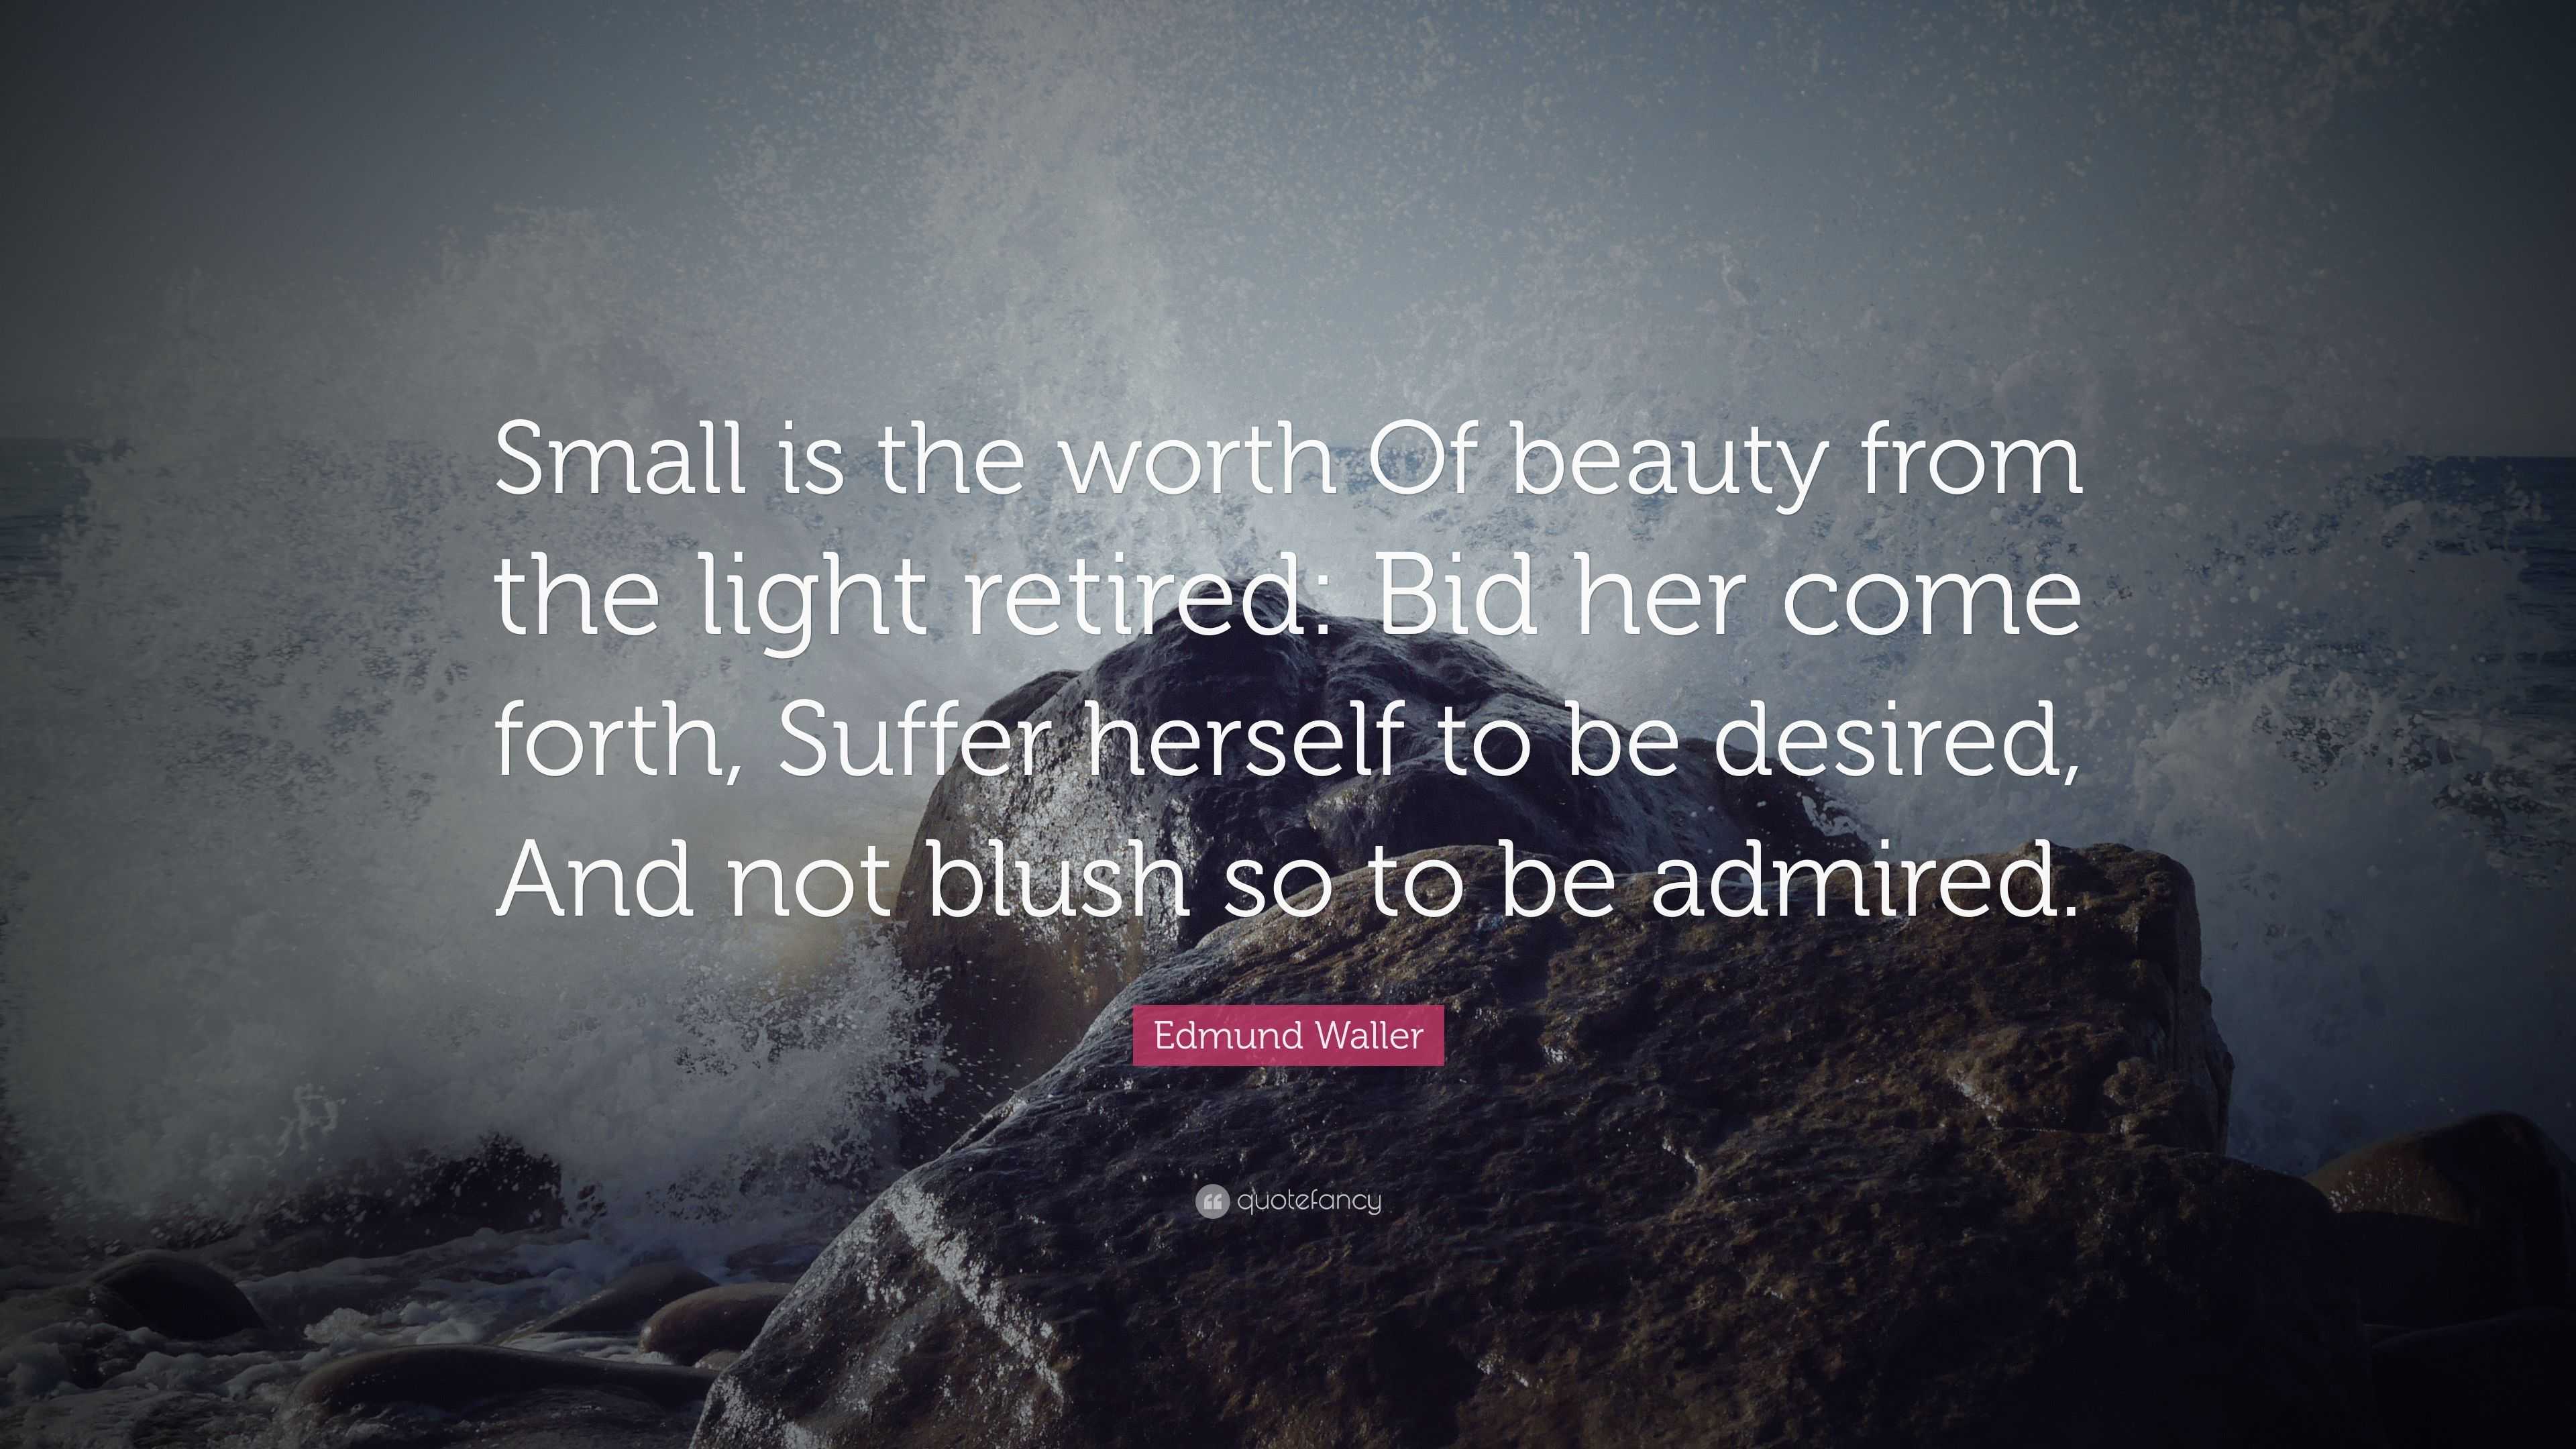 Edmund Waller Quote: “Small is the worth Of beauty from the light ...